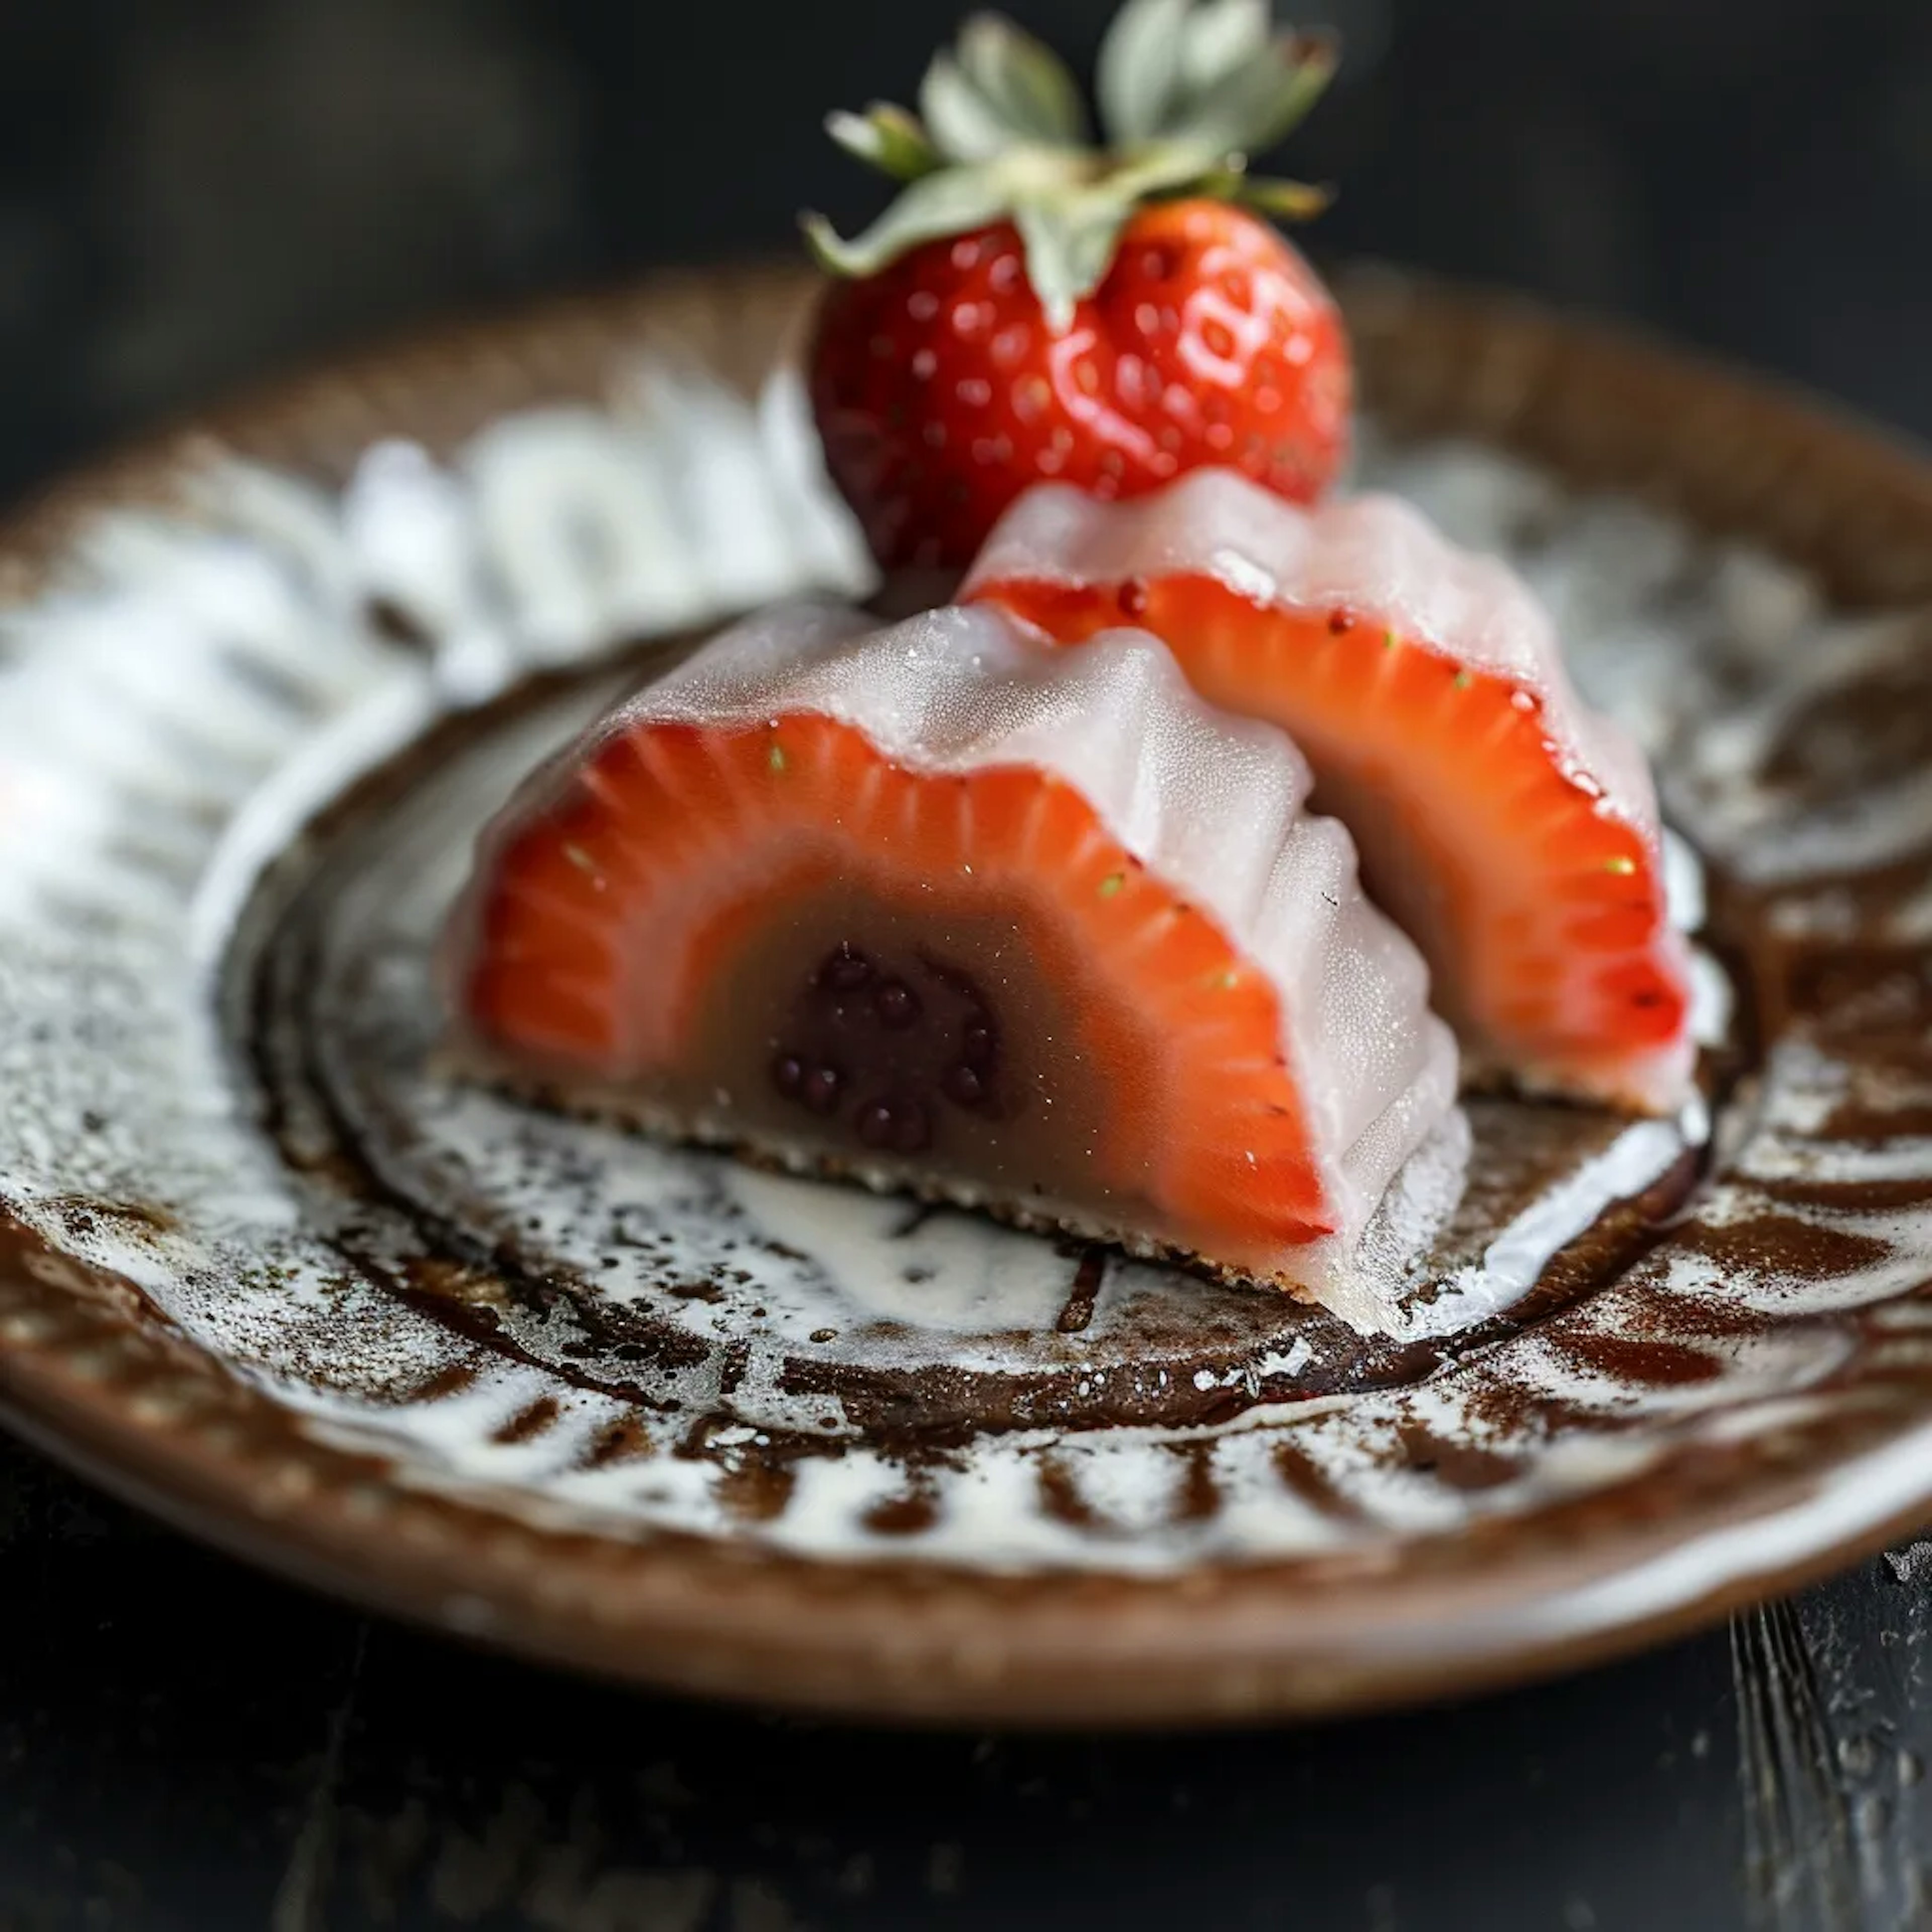 undefined-https://d3nrav7vo3lya8.cloudfront.net/profile_photos/japanese-sweets/106p.webp